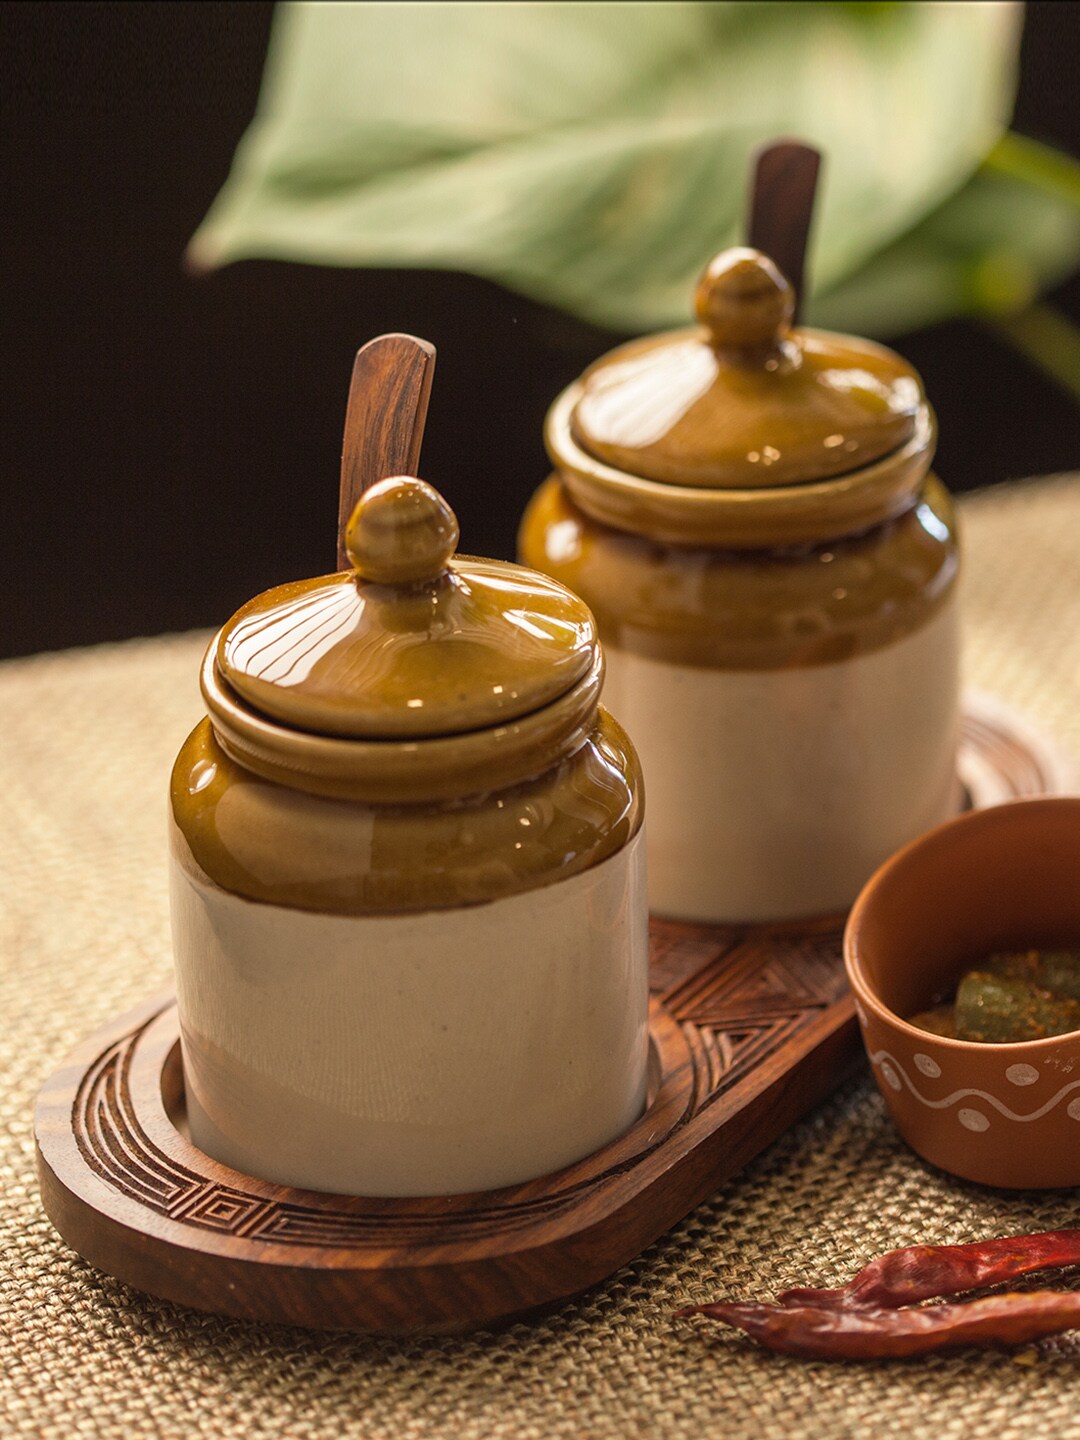 ExclusiveLane Old Fashioned Ceramic Jars With Hand Carved Wooden Tray Price in India